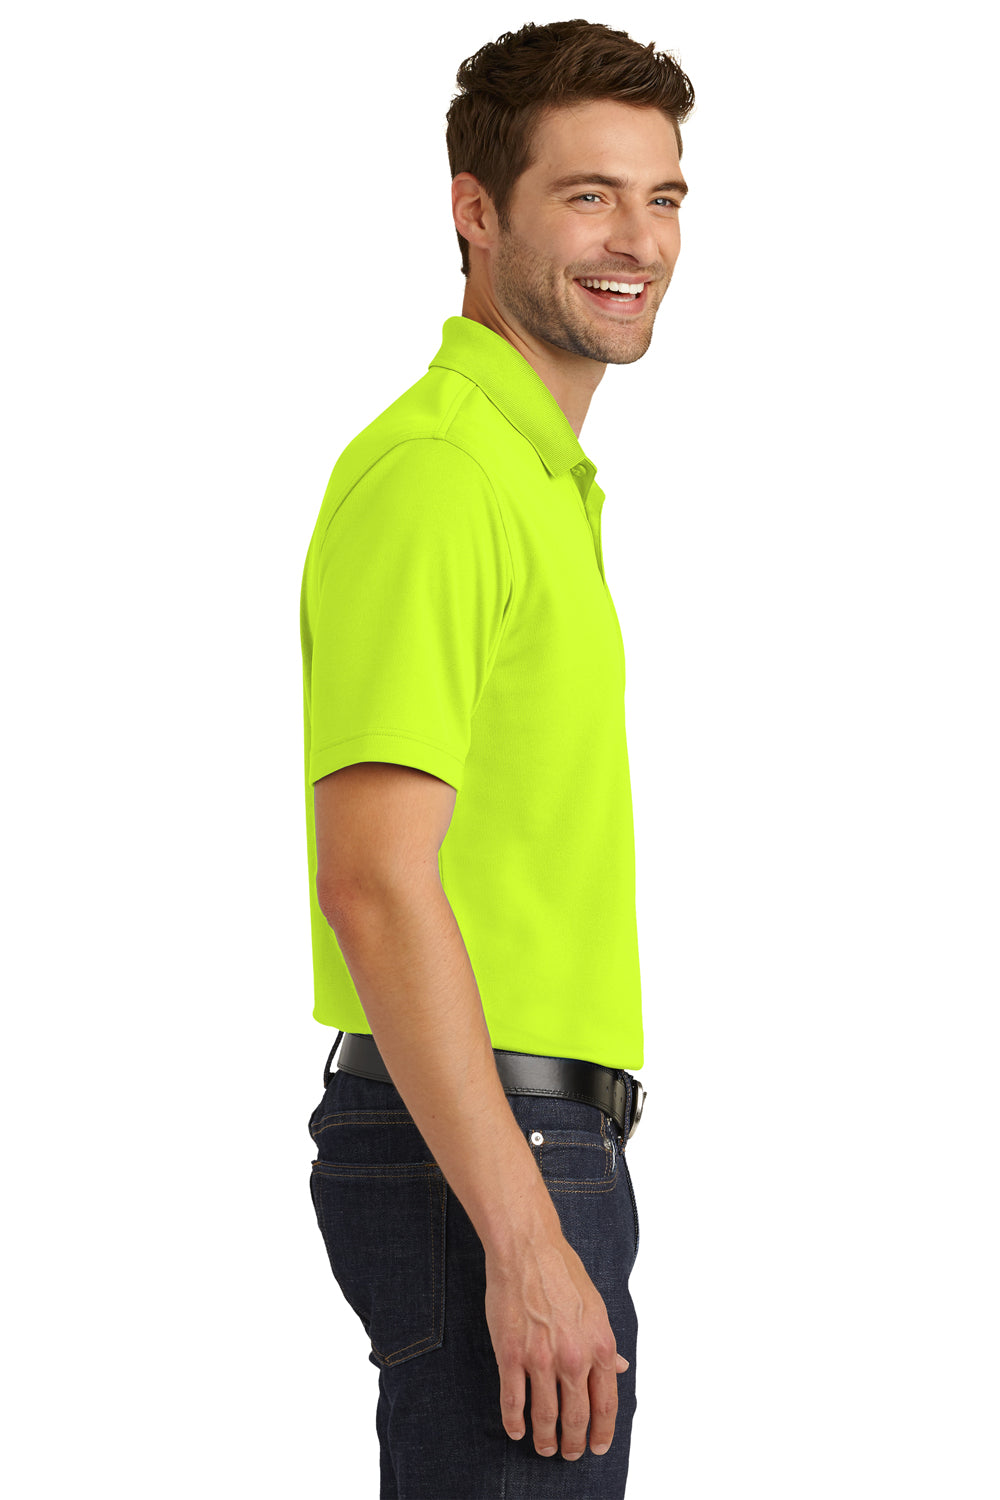 Port Authority Mens Dry Zone Moisture Wicking Short Sleeve Polo Shirt Safety Yellow Side